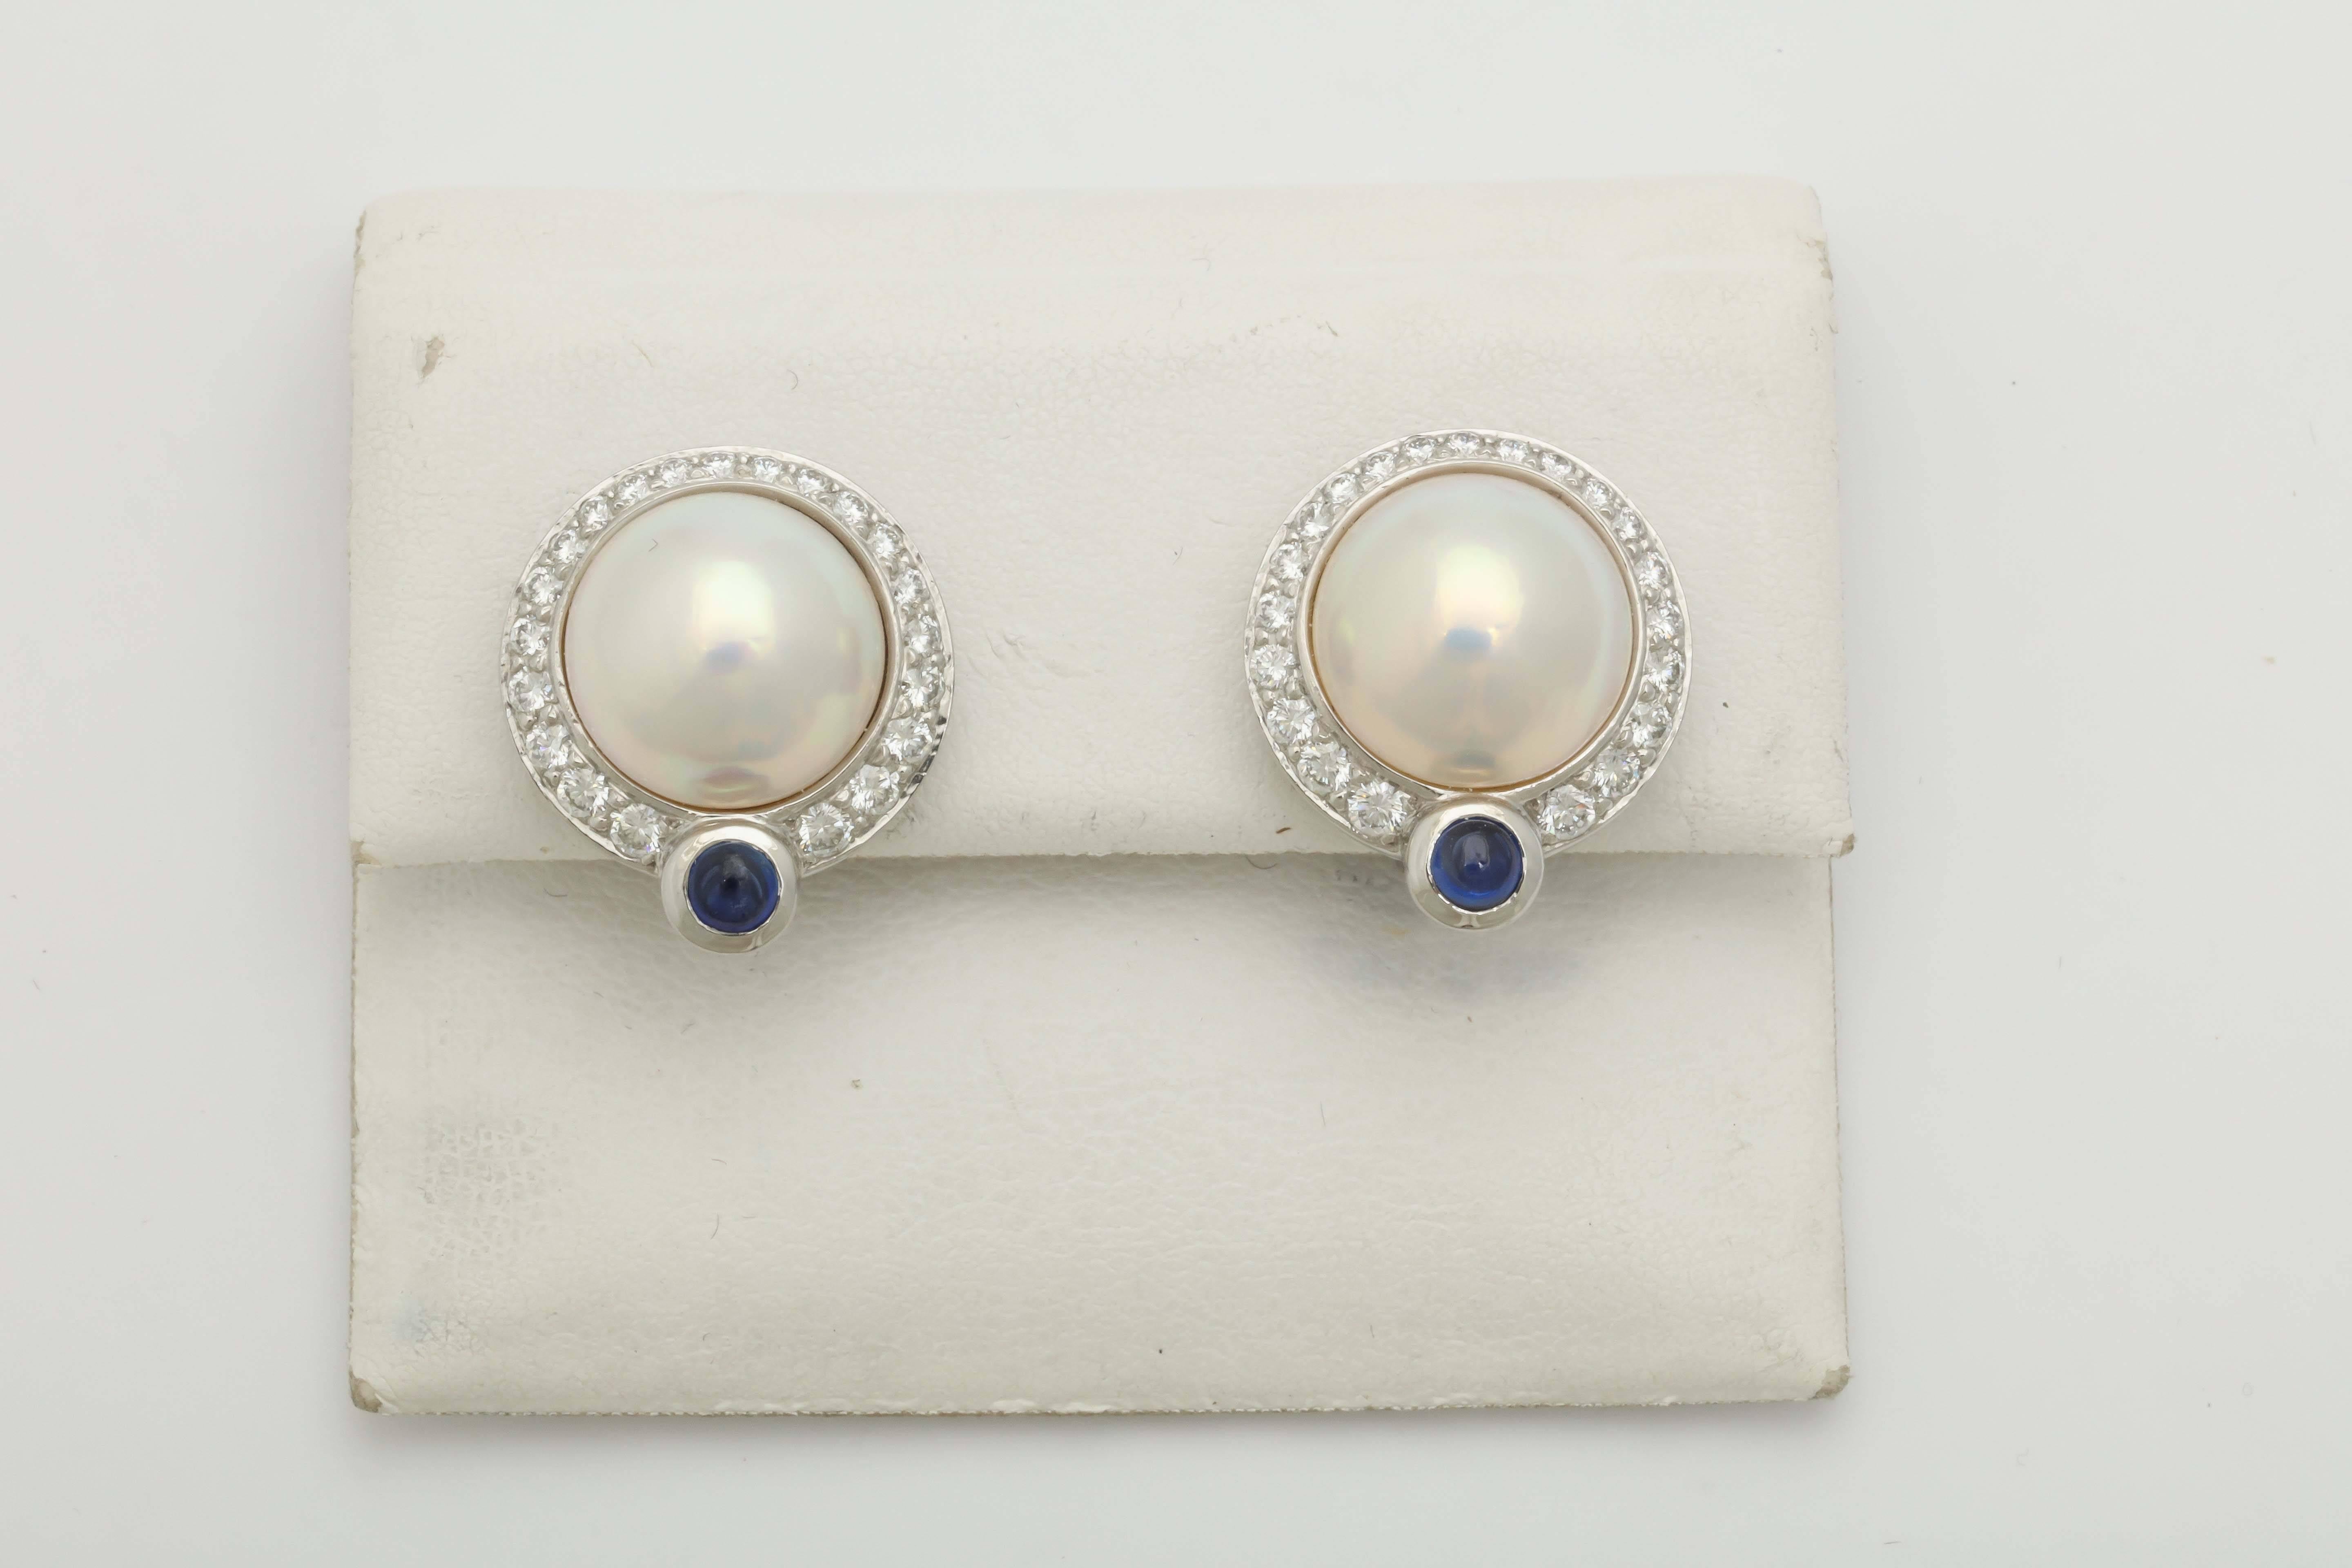 One Pair Of Platinum Circle Shaped Earrings Embellished with numerous Full Cut Diamonds Weighing Approximately 2 carats And Centering a n 11mm High Quality & Beautiful Lustre Mabe' Pearl. On Bottom Of Earrings Are 2 Beautiful Color Cabochon